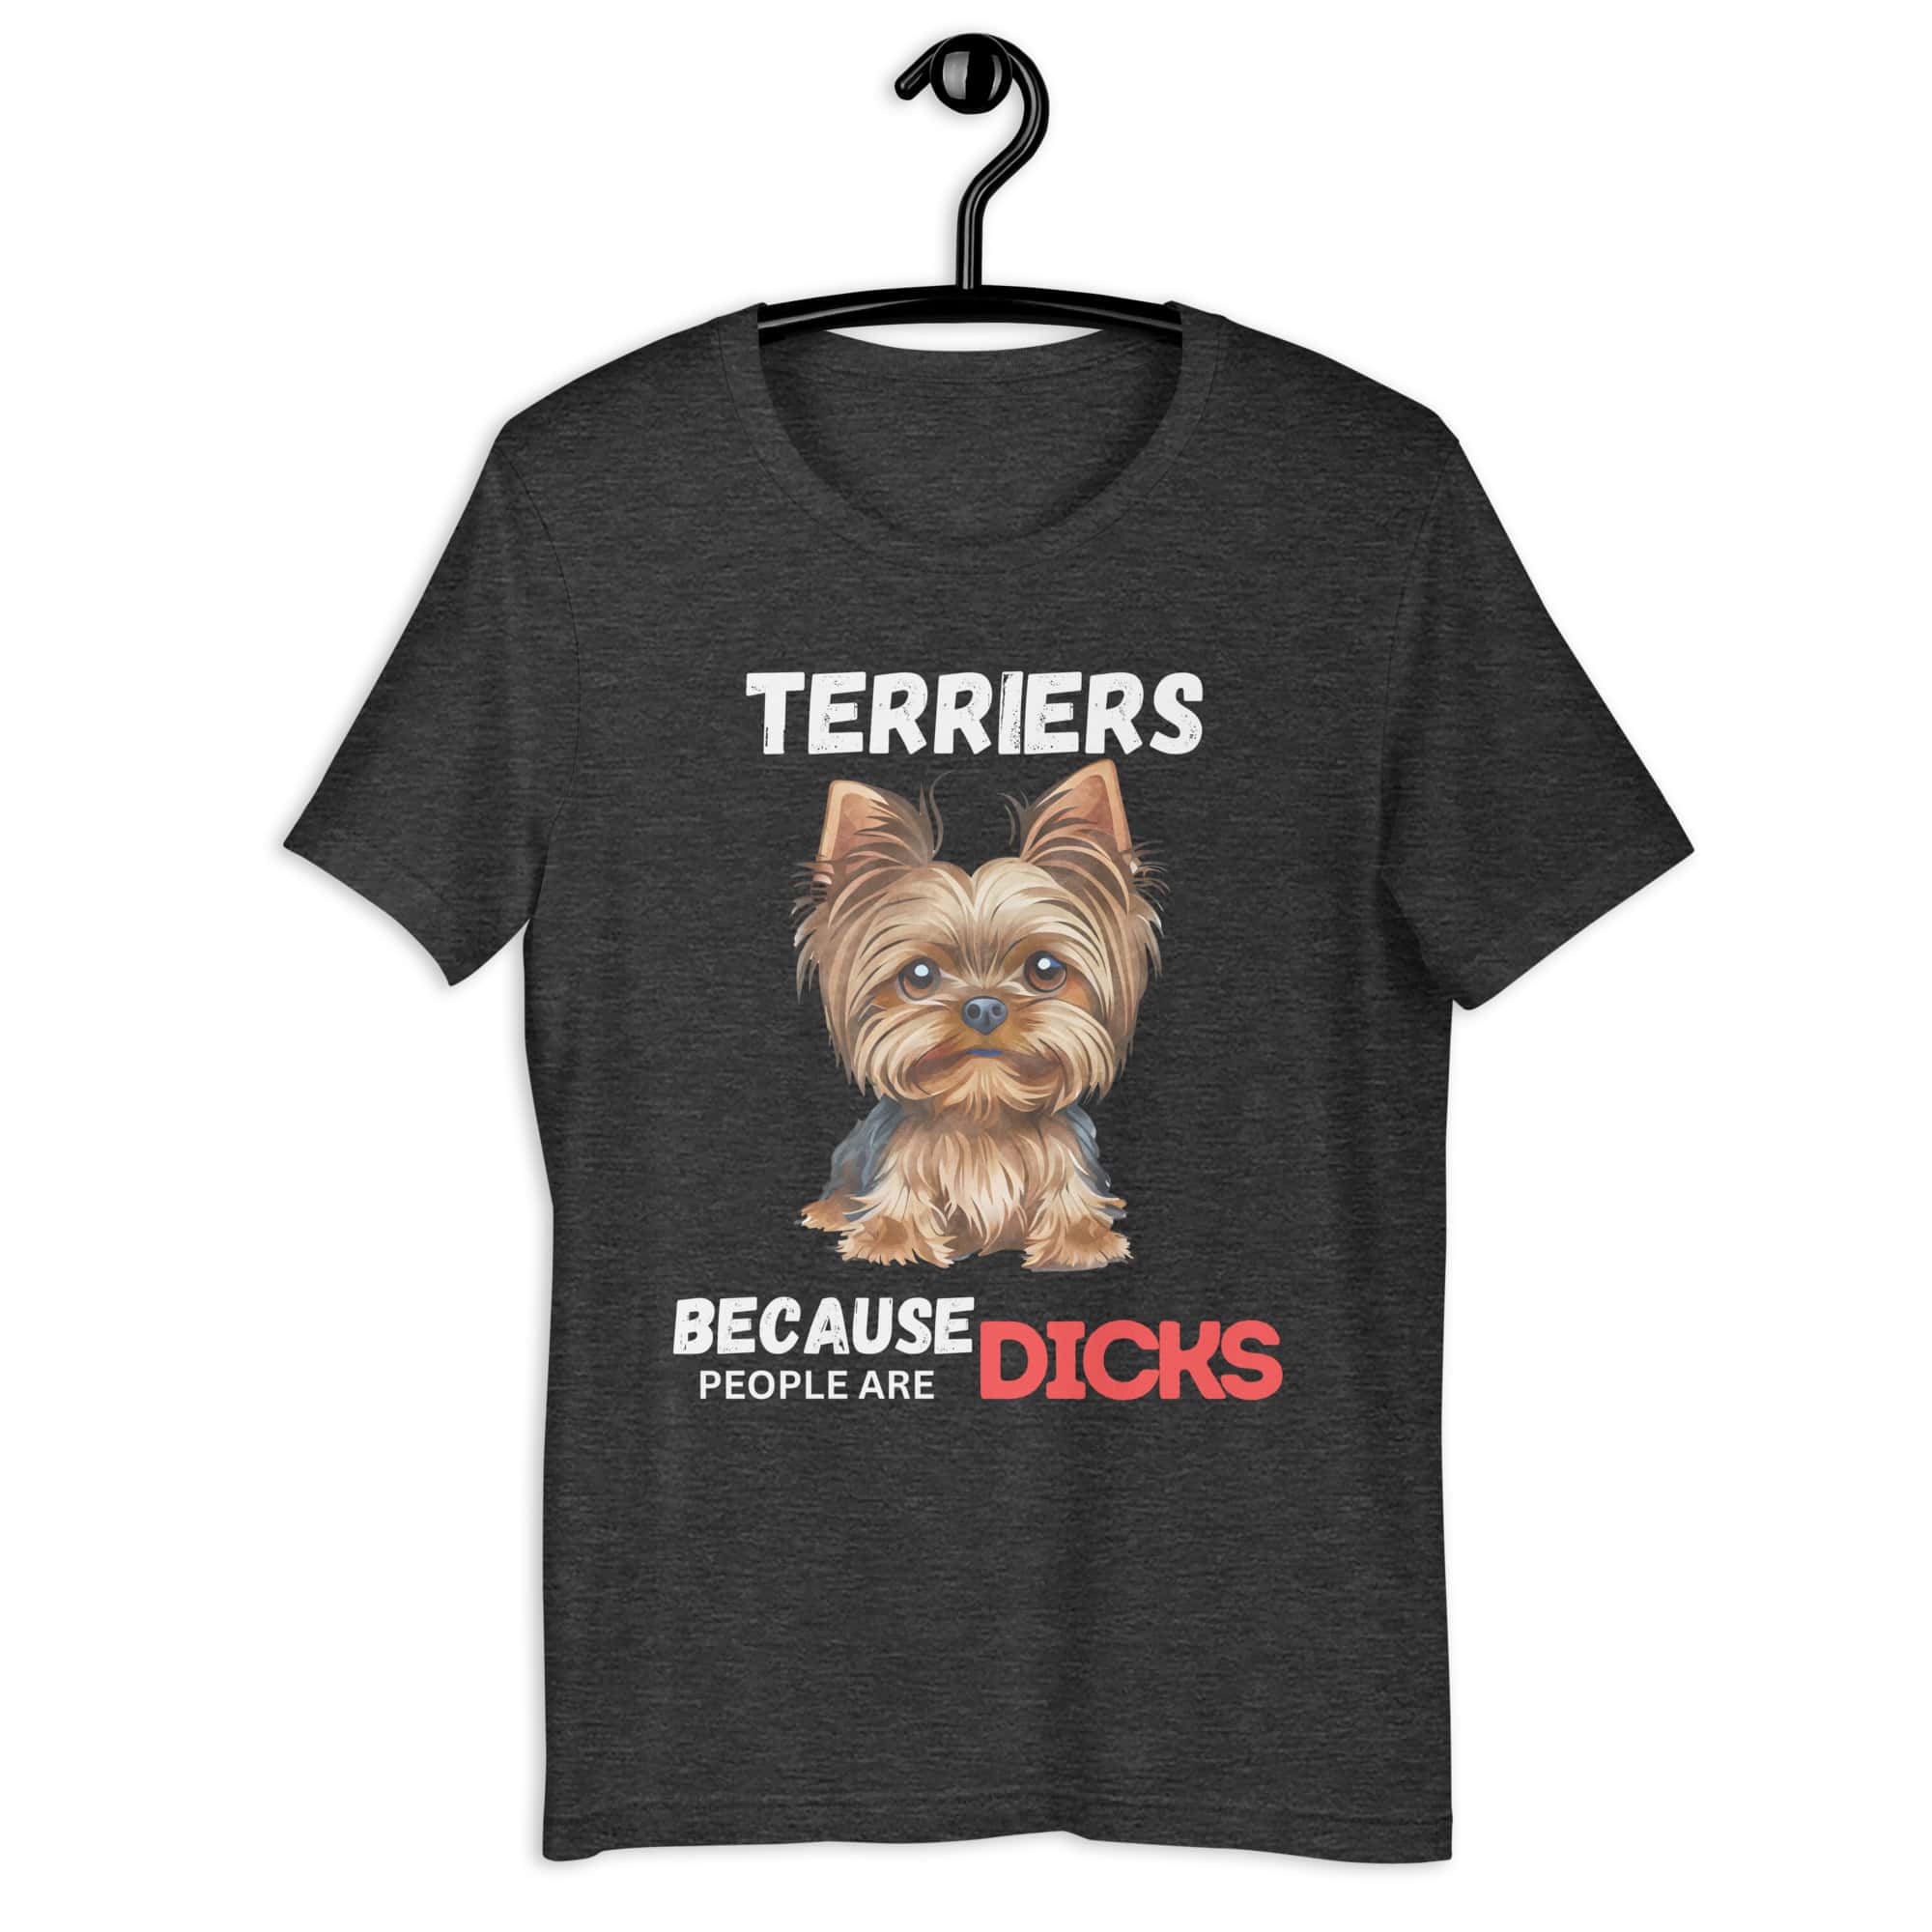 Yorkshire Terriers Because People Are Dicks Unisex T-Shirt - black